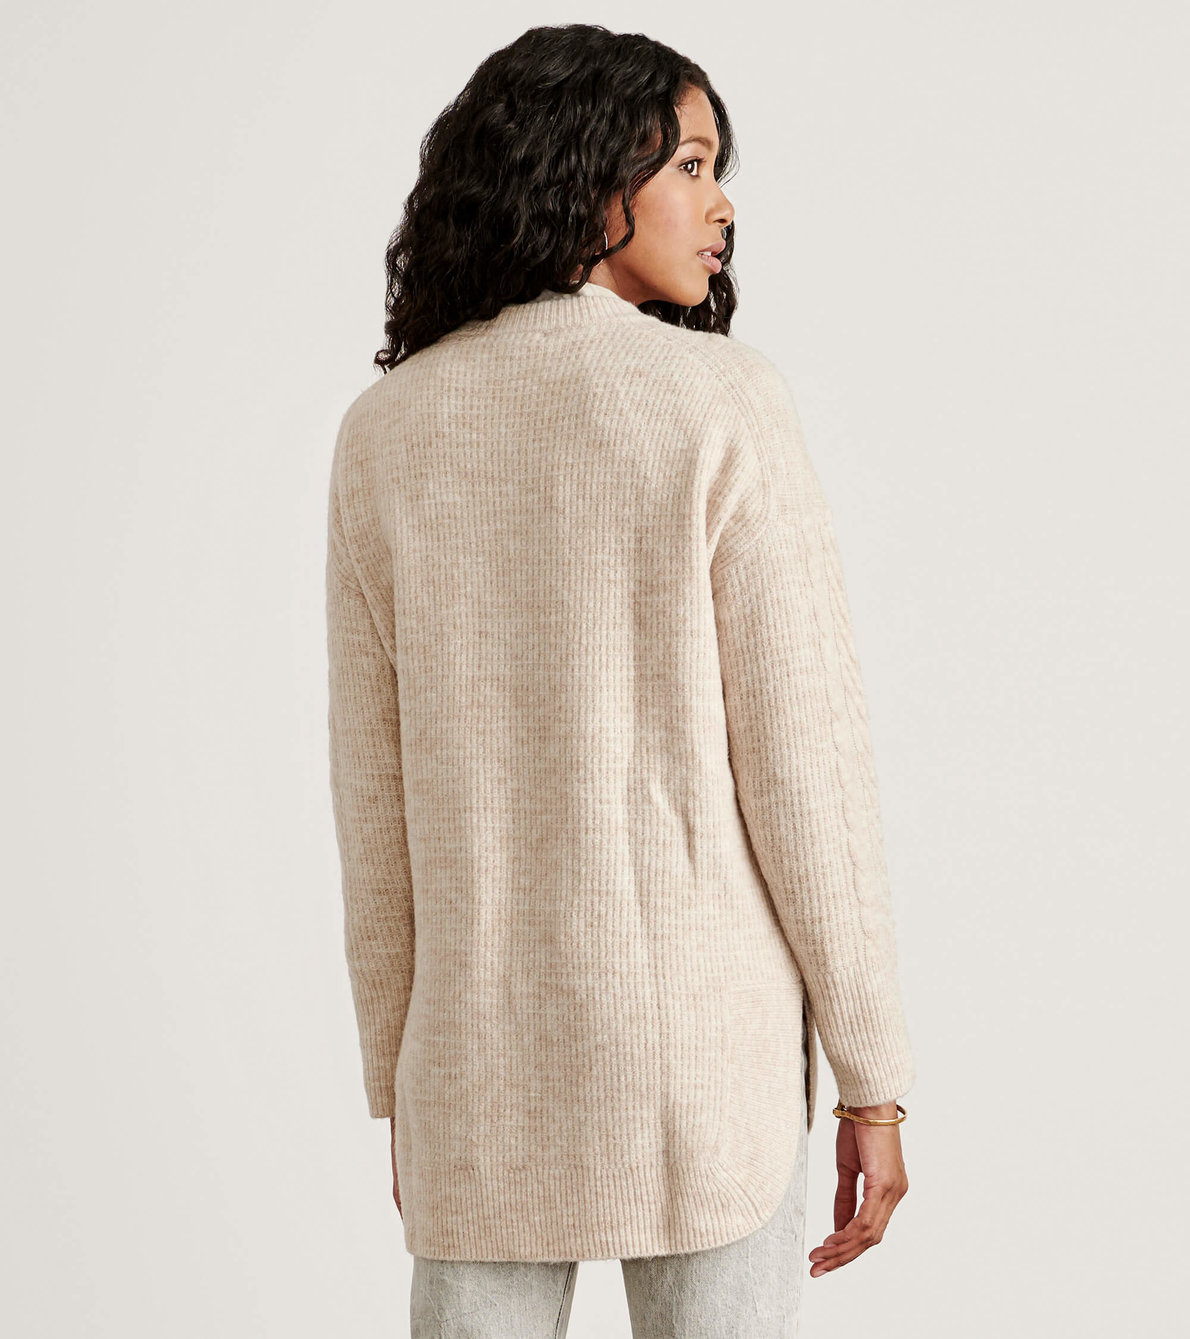 View larger image of Cable Knit Tunic - Cream